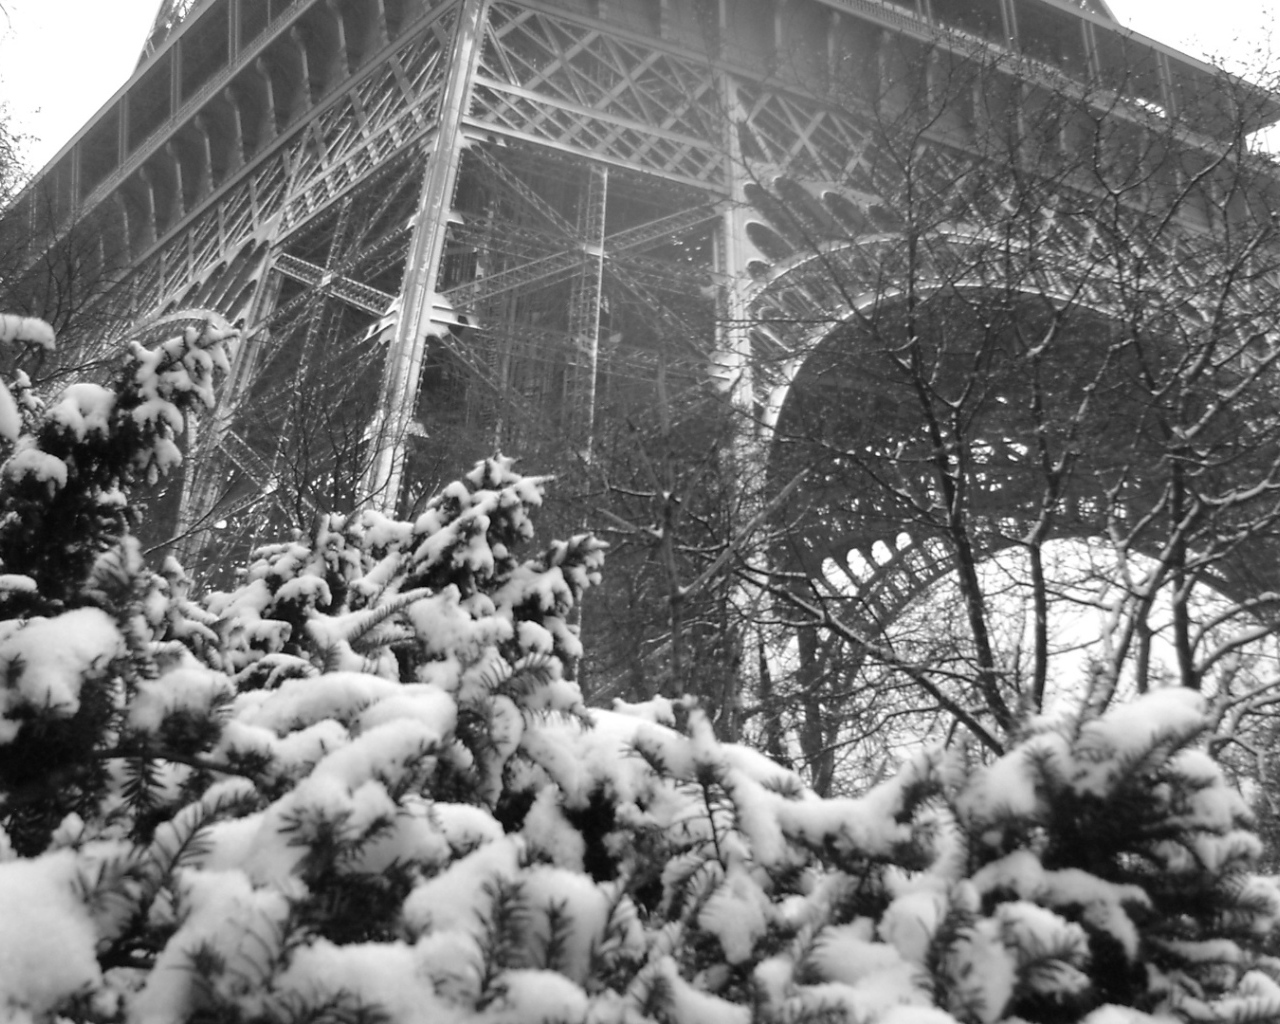 Snow in Paris, at the foot of the Eiffel Tower